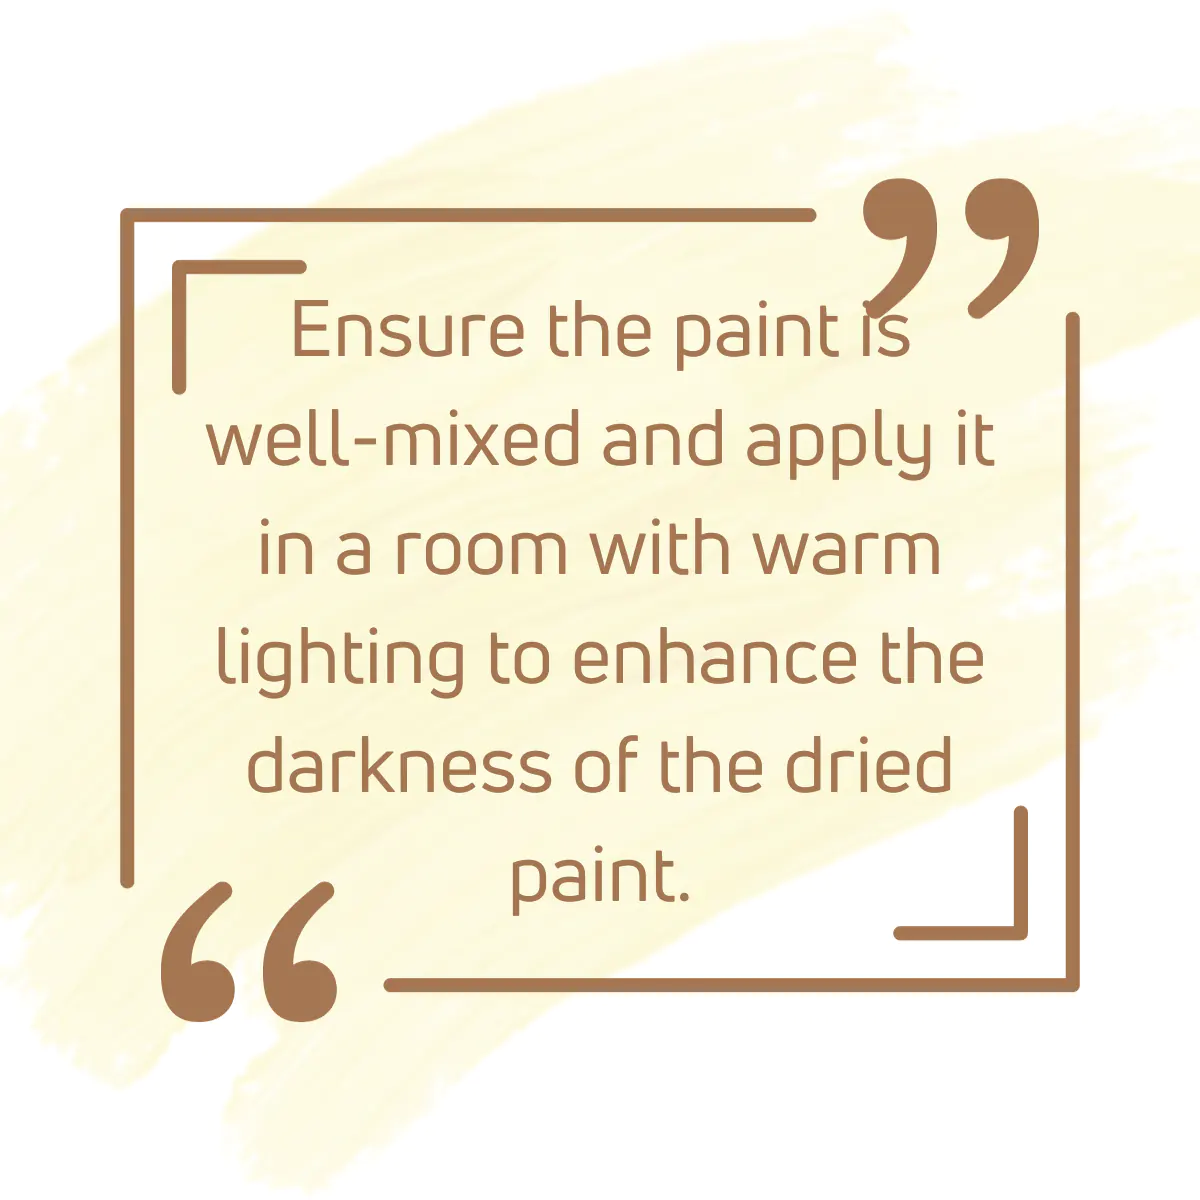 Tip for drying of paints